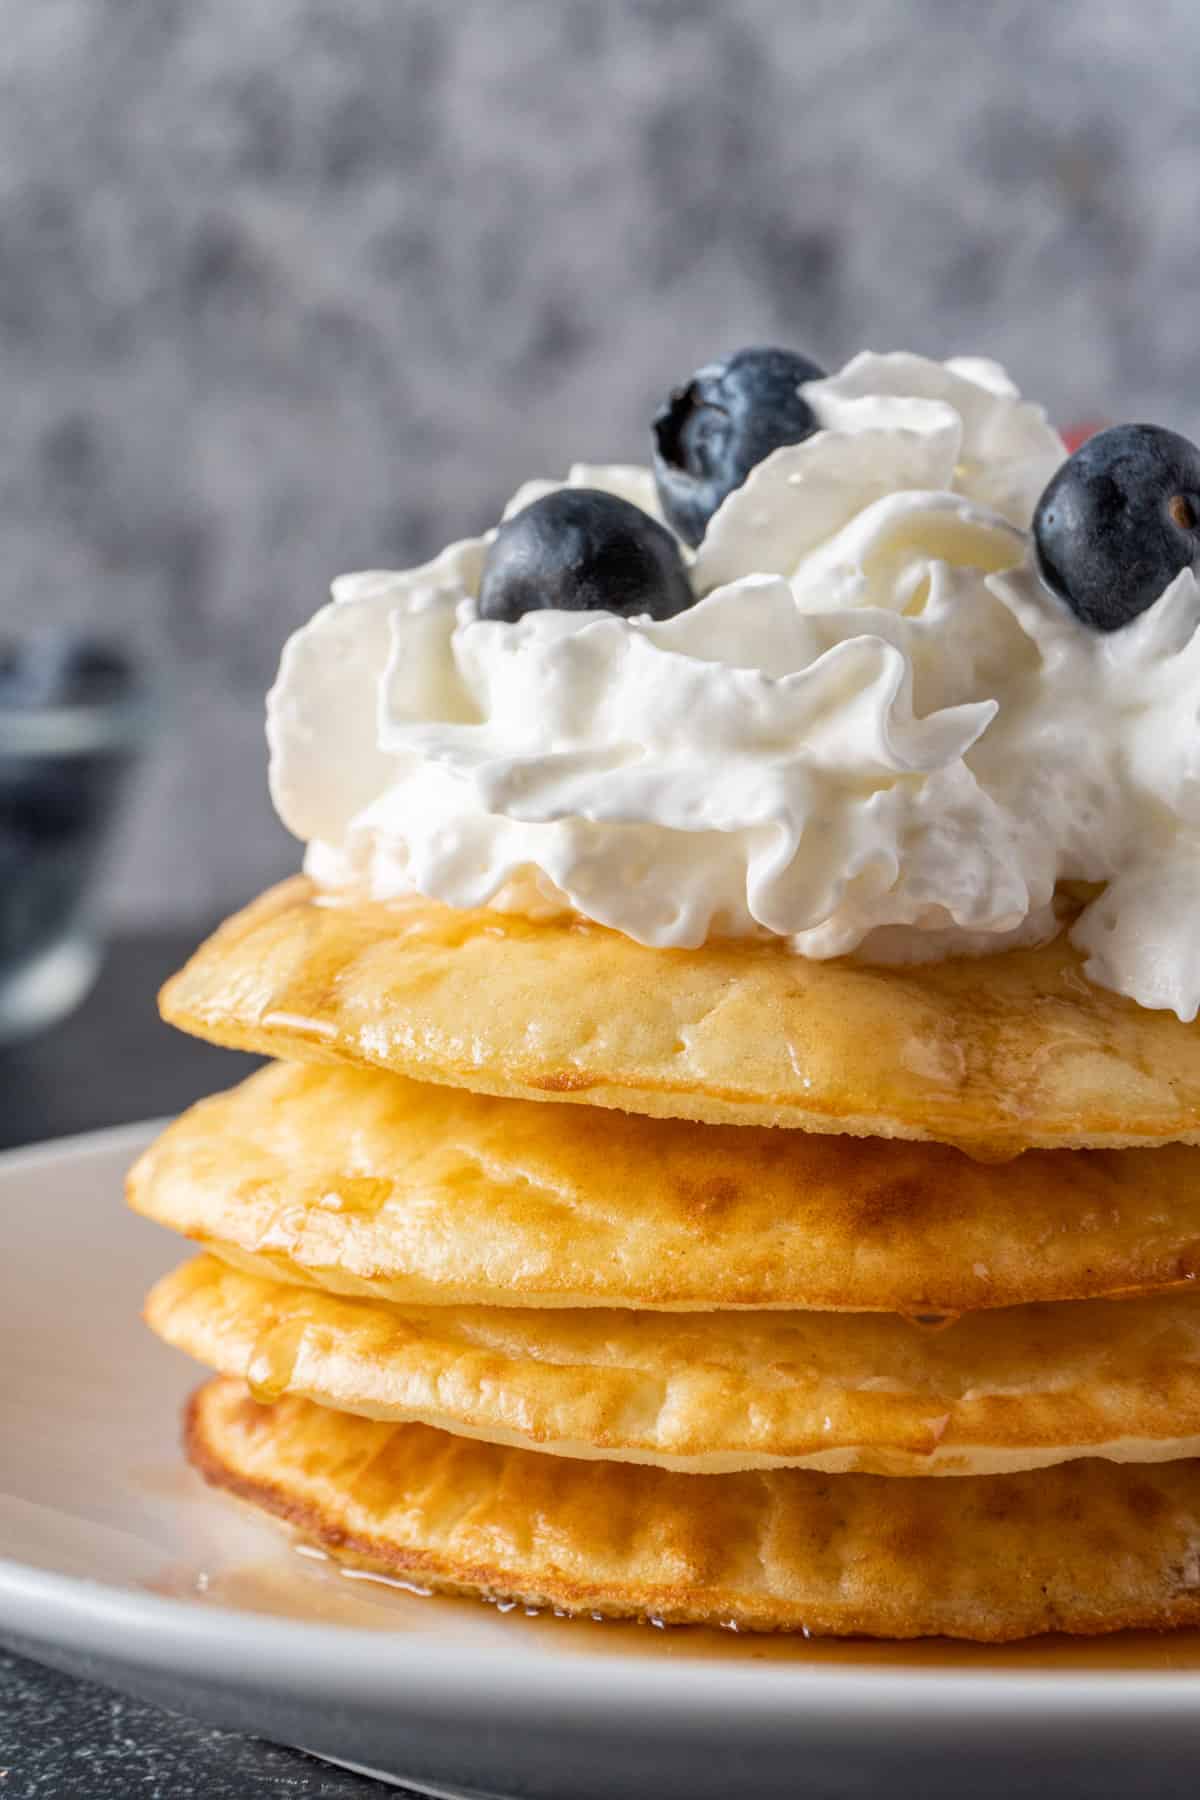 air fryer pancakes with wihhped cream an blueberries close up.